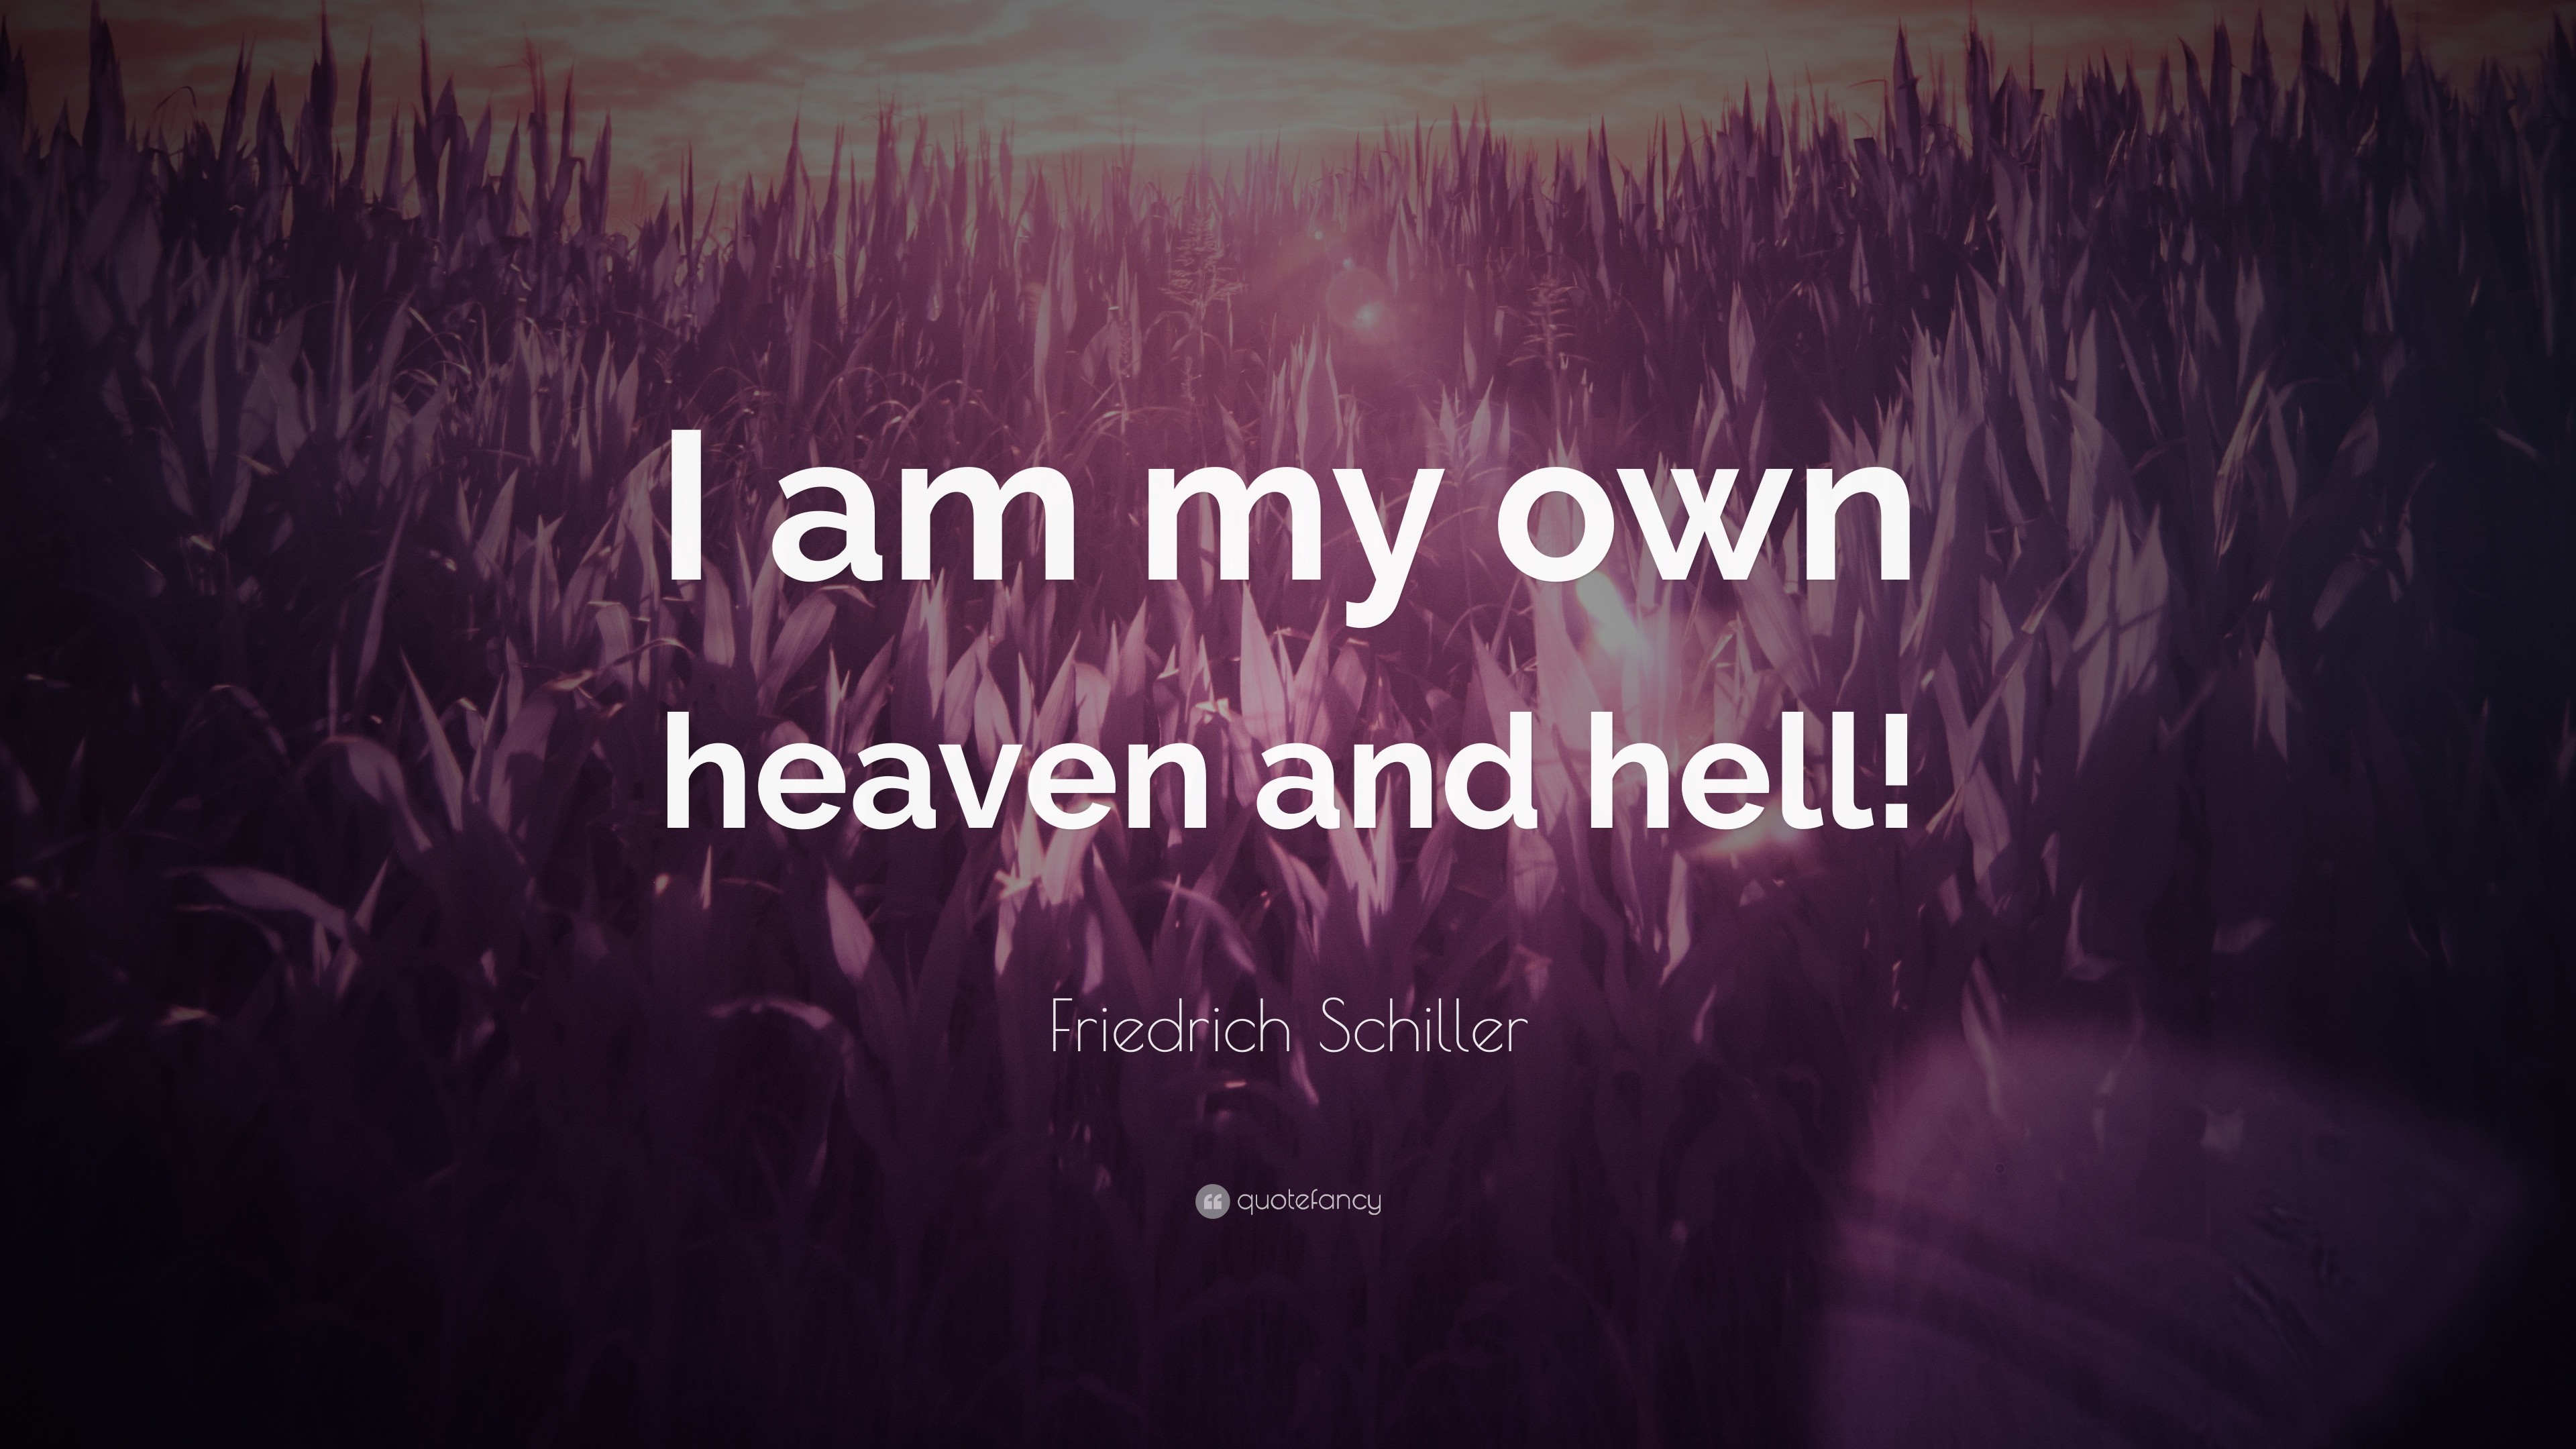 3840x2160 Friedrich Schiller Quote: “I am my own heaven and hell!”